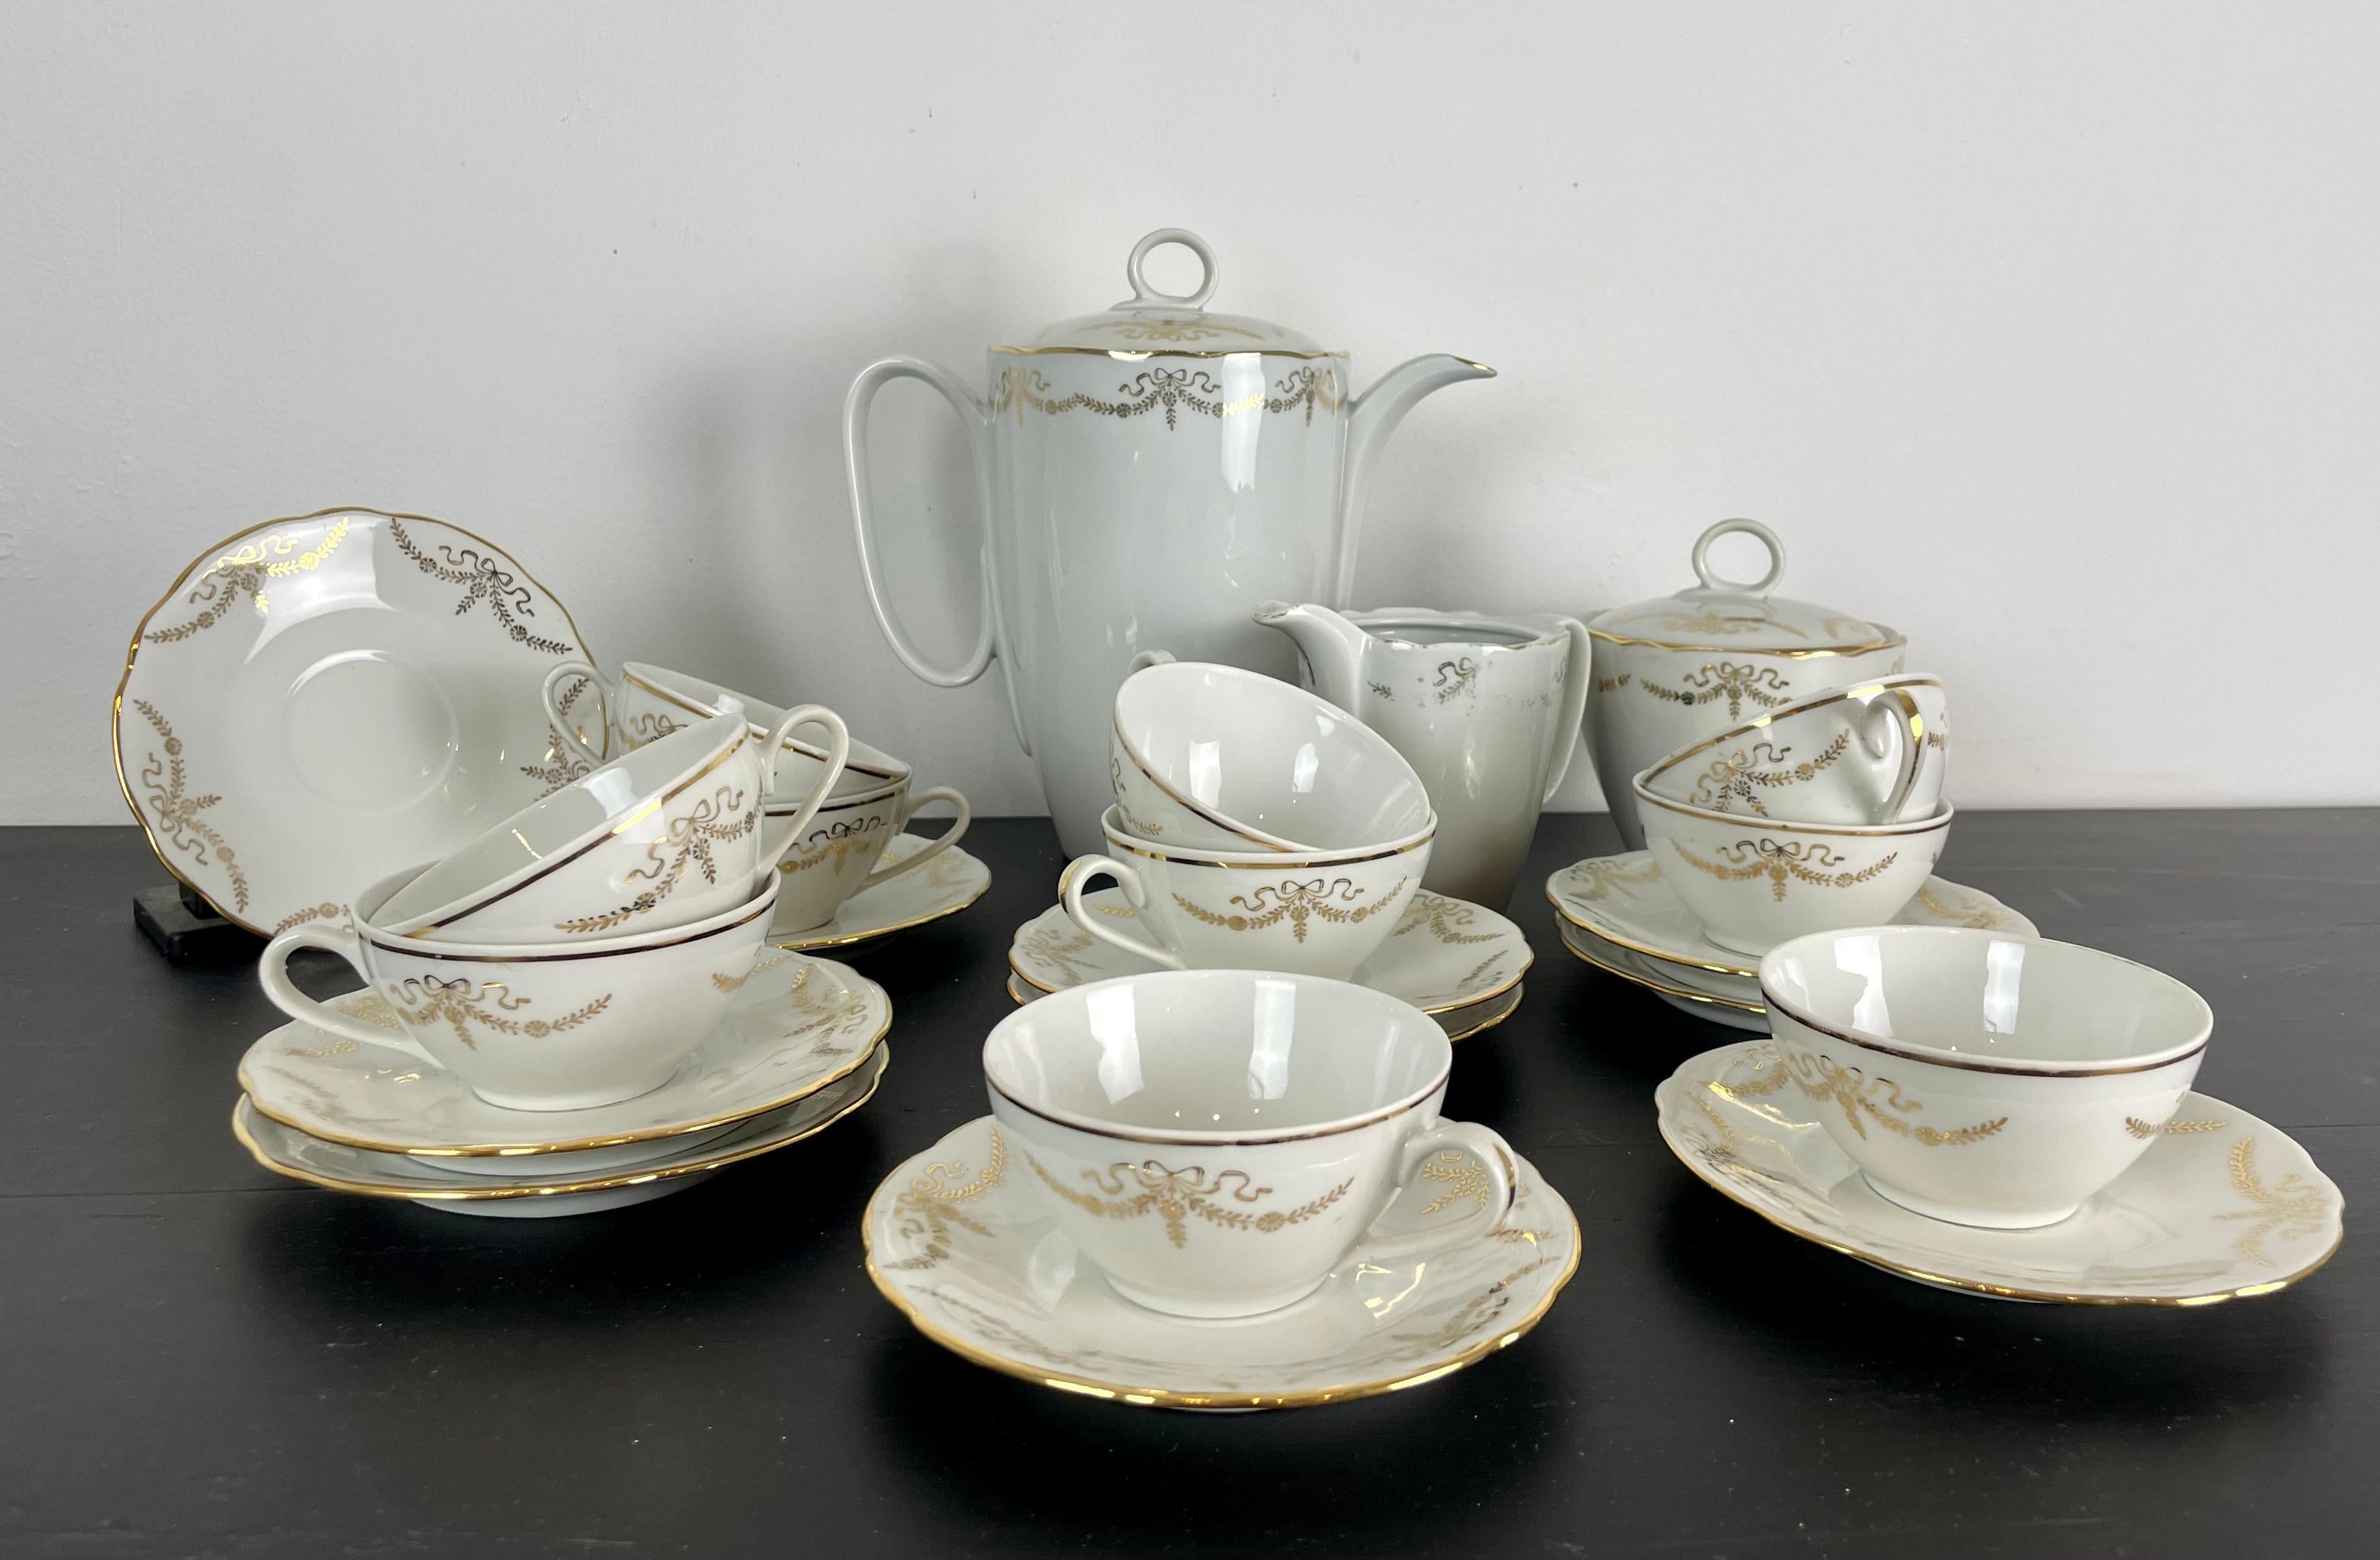 Nice coffee or tea service from the first half of the 20th century for 10 people.
Beautiful porcelain quality, white with fine gold edging and gold patterns on each piece.
High Porcelain of Berry, Compagnie Nationale de porcelaine, France

Measures: